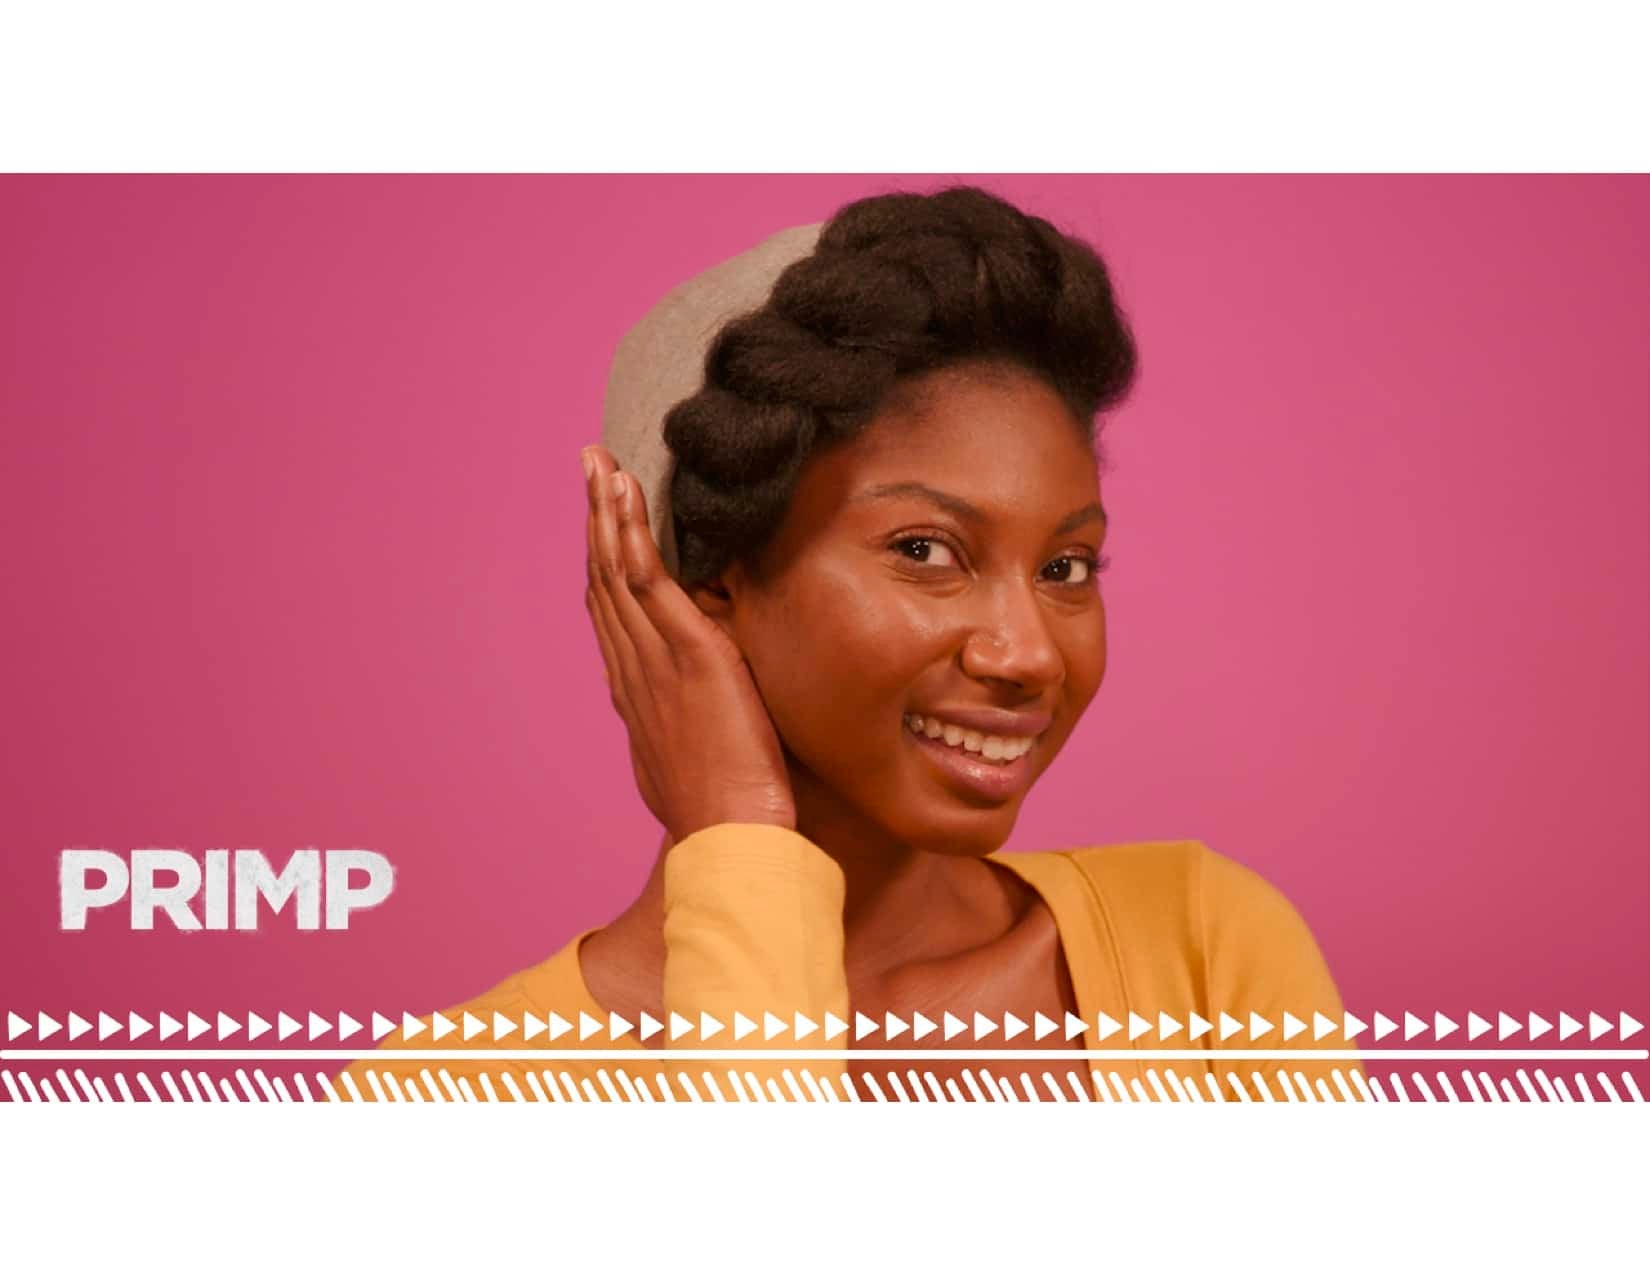 Watch 'PRIMP': Learn A Few Stylish Ways To Wear Your Natural Hair Underneath Your Hat